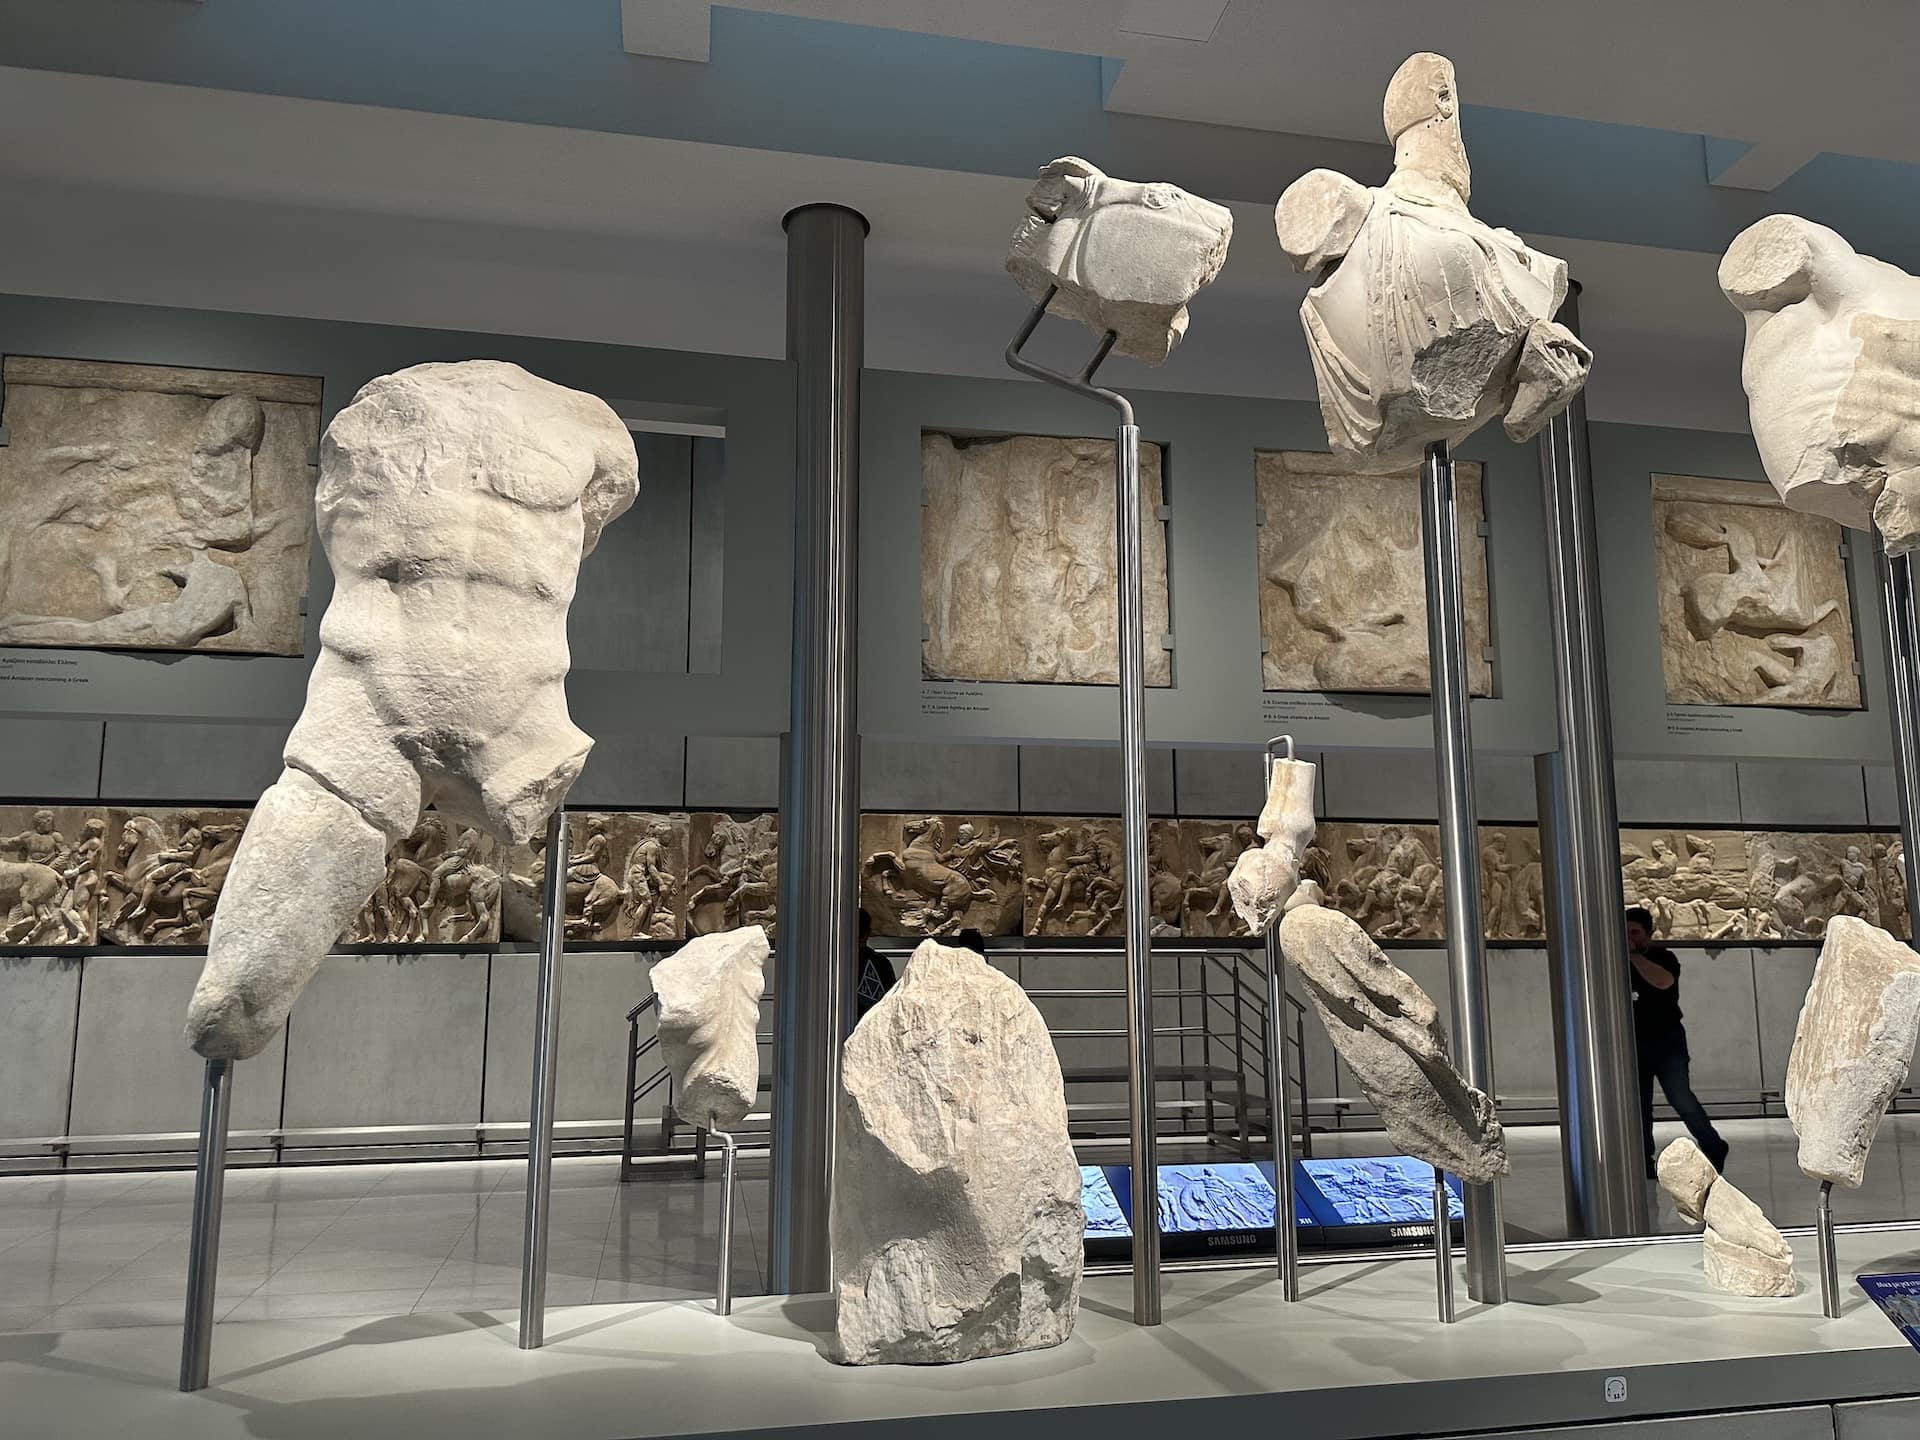 Hermes (left), Athena (center), and Poseidon (right) on the west pediment of the Parthenon at the Acropolis Museum in Athens, Greece